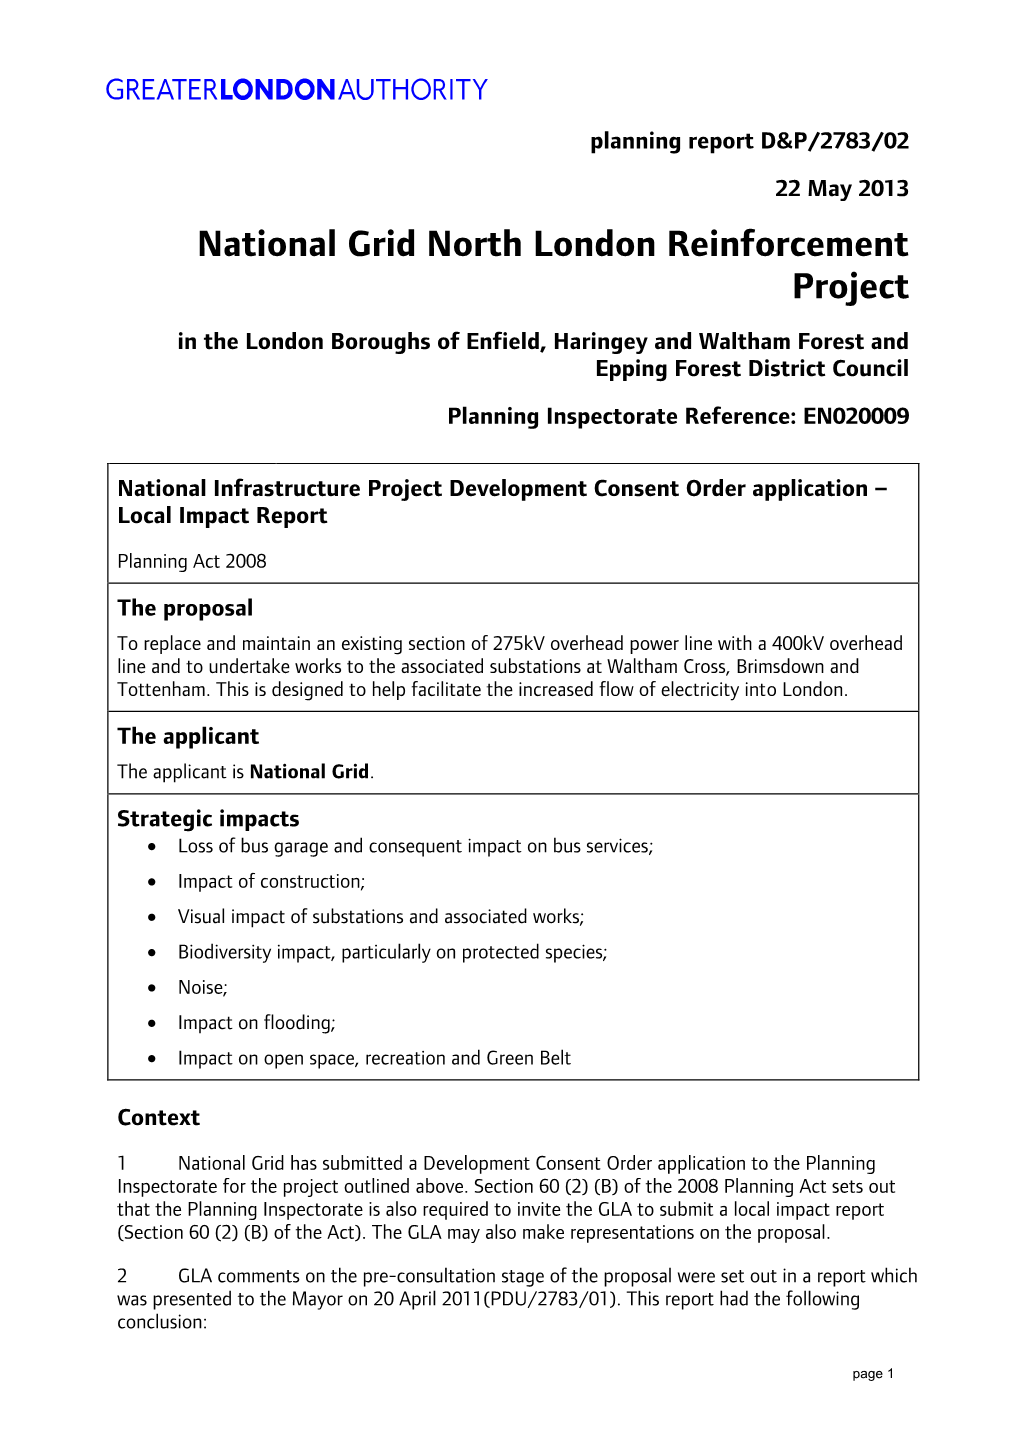 National Grid North London Reinforcement Project